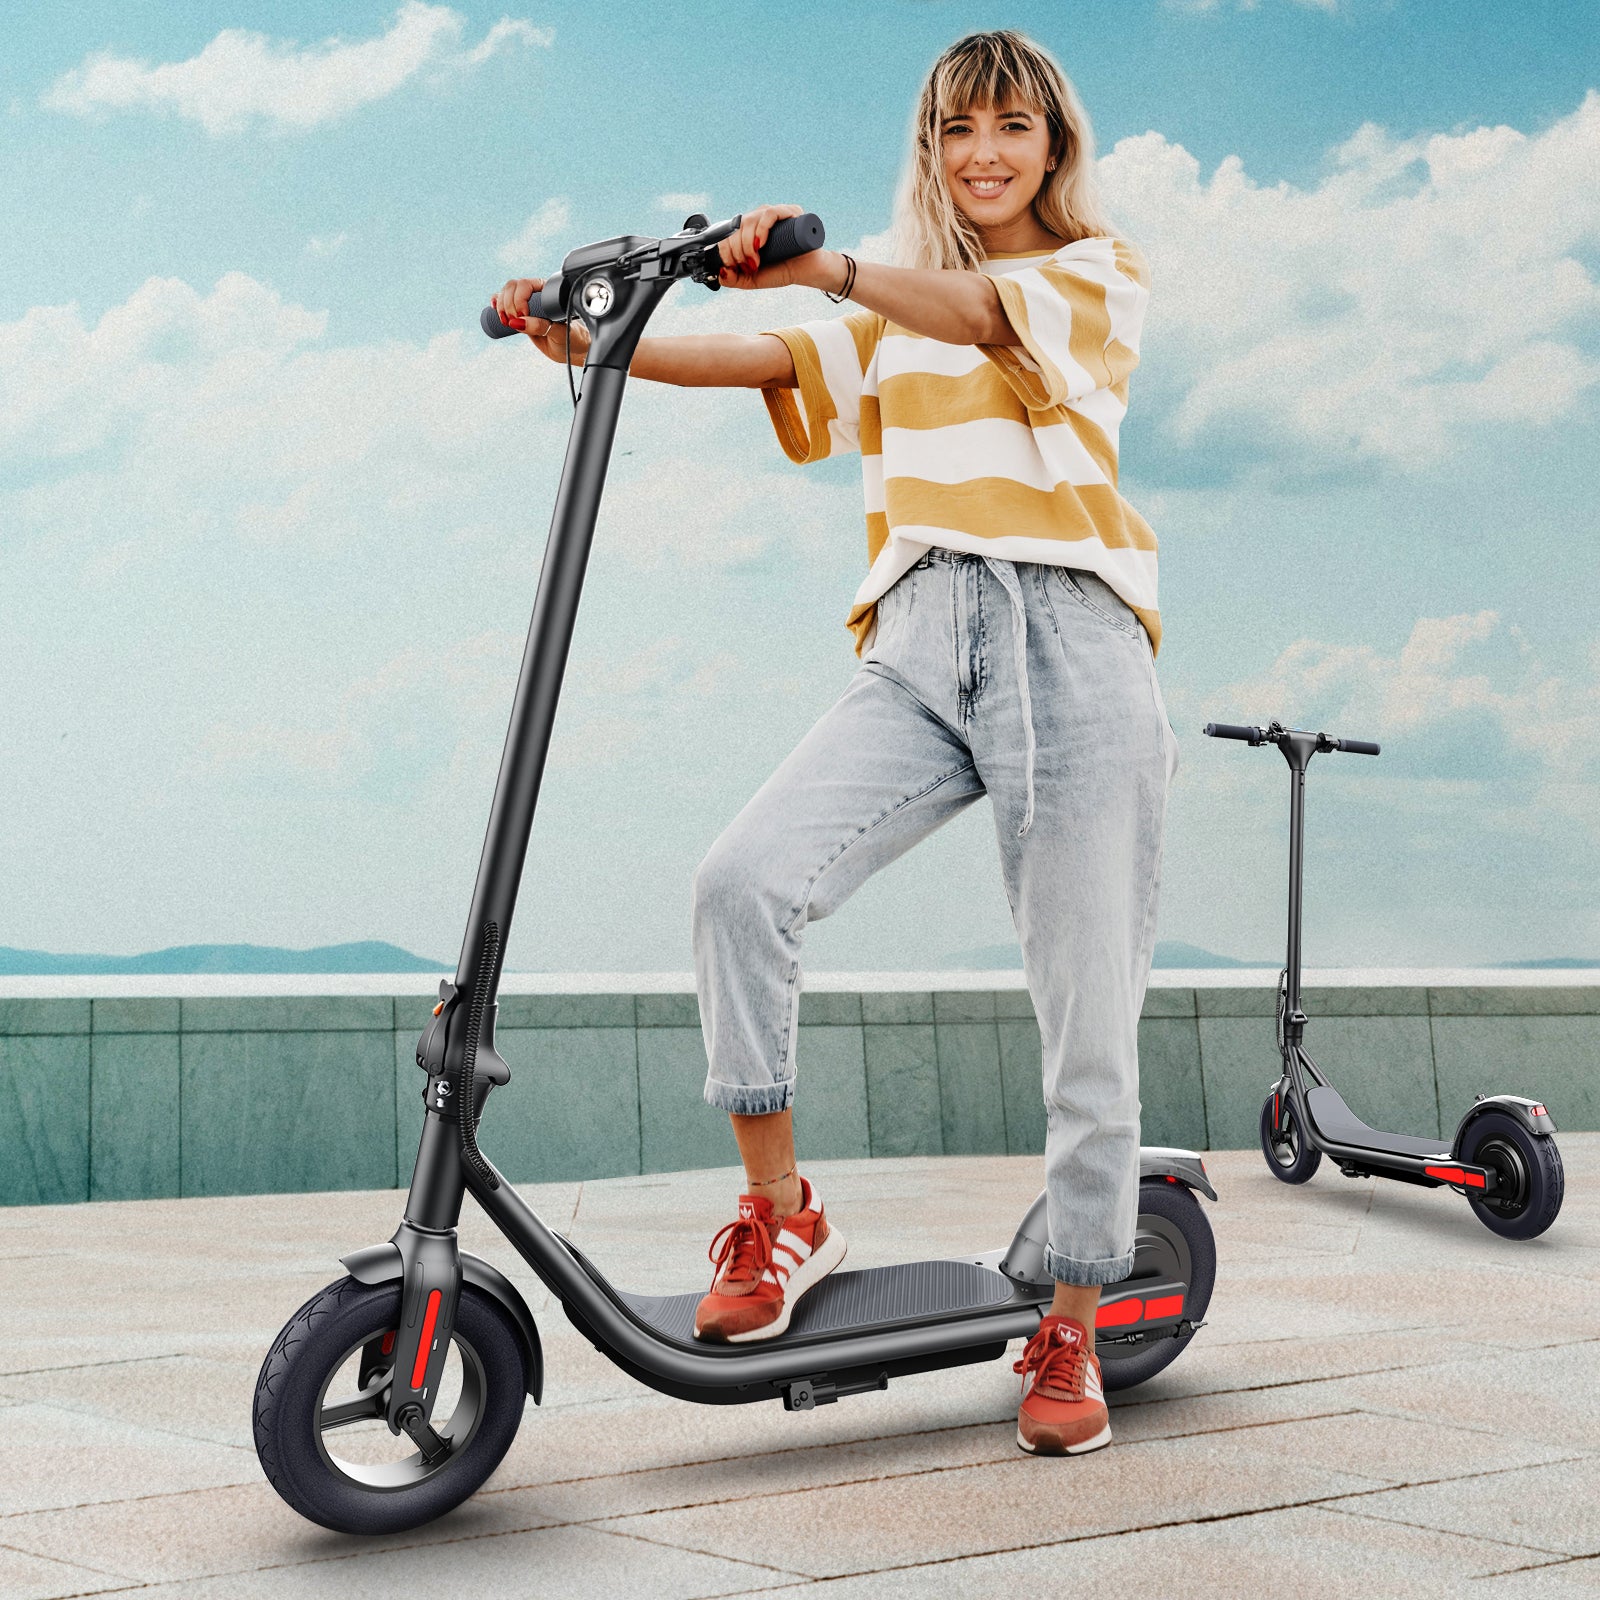 SISIGAD 102 Pro 10" Electric Scooter for Adults, 600W Powerful Motor, 48V 7.5A Battery, up to 19mph and 25 Miles Long Range, Max Load 260lbs - SISIGAD